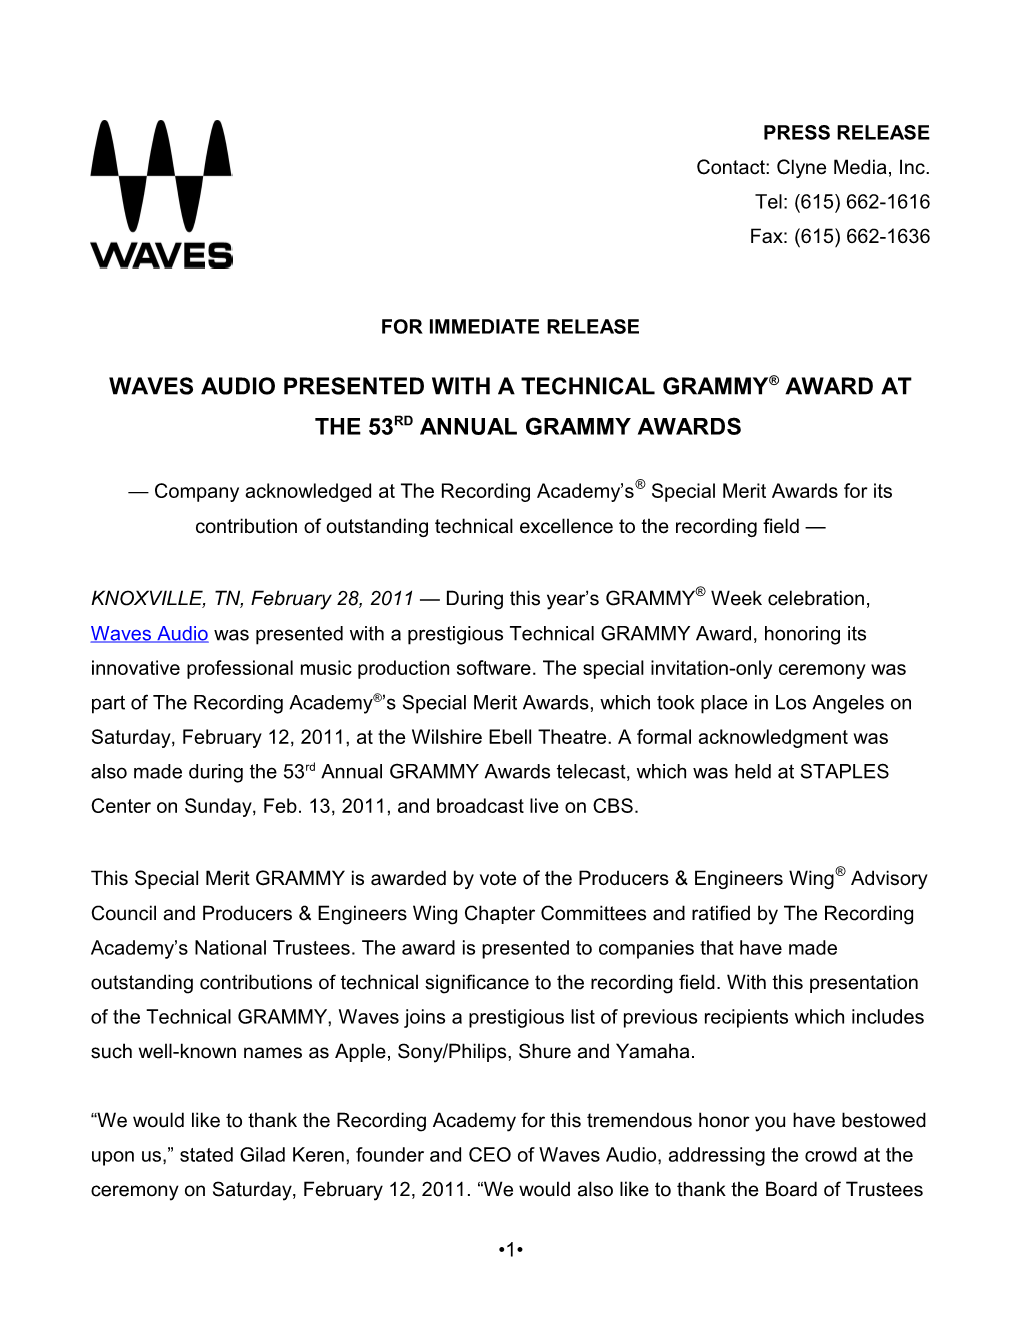 Waves Audio PRESENTED with a TECHNICAL GRAMMY AWARD at the 53RD ANNUAL GRAMMY AWARDS